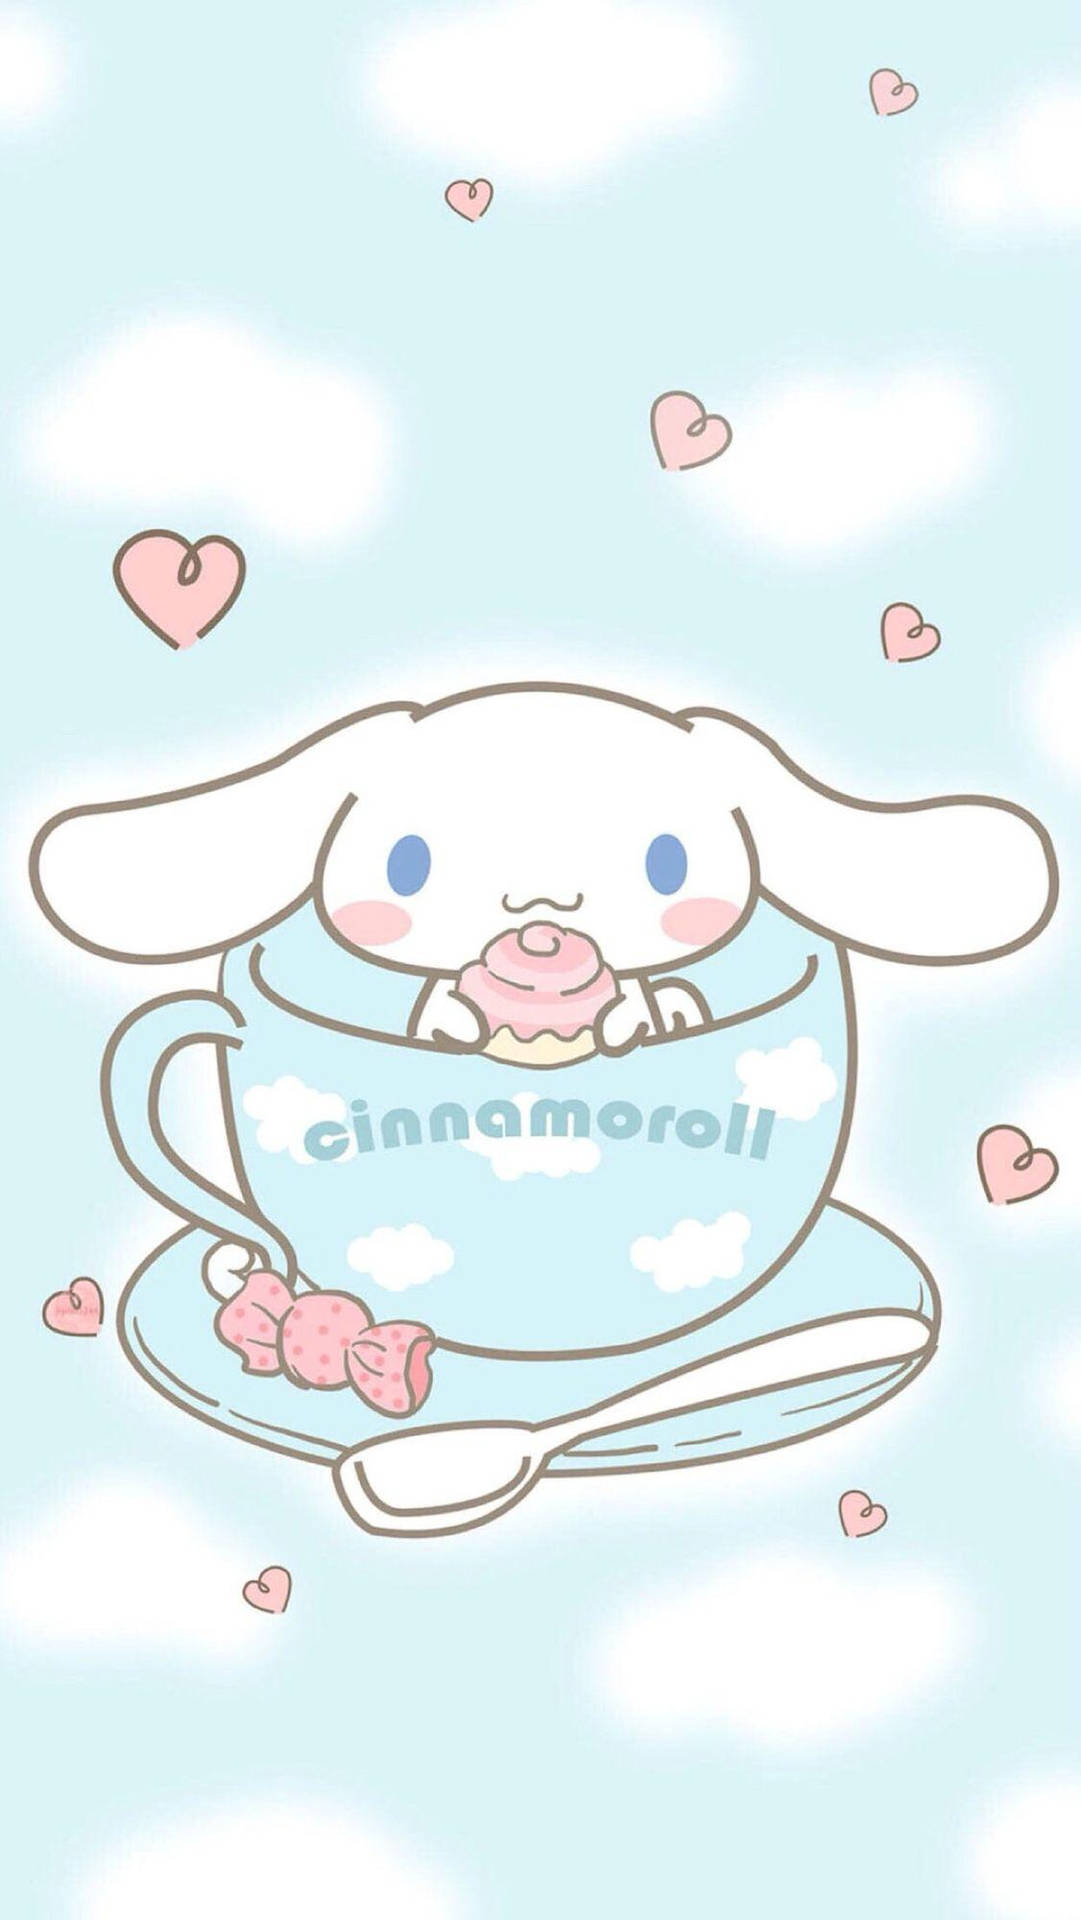 Adorable Cinnamoroll Lounging On Clouds In The Sky Wallpaper